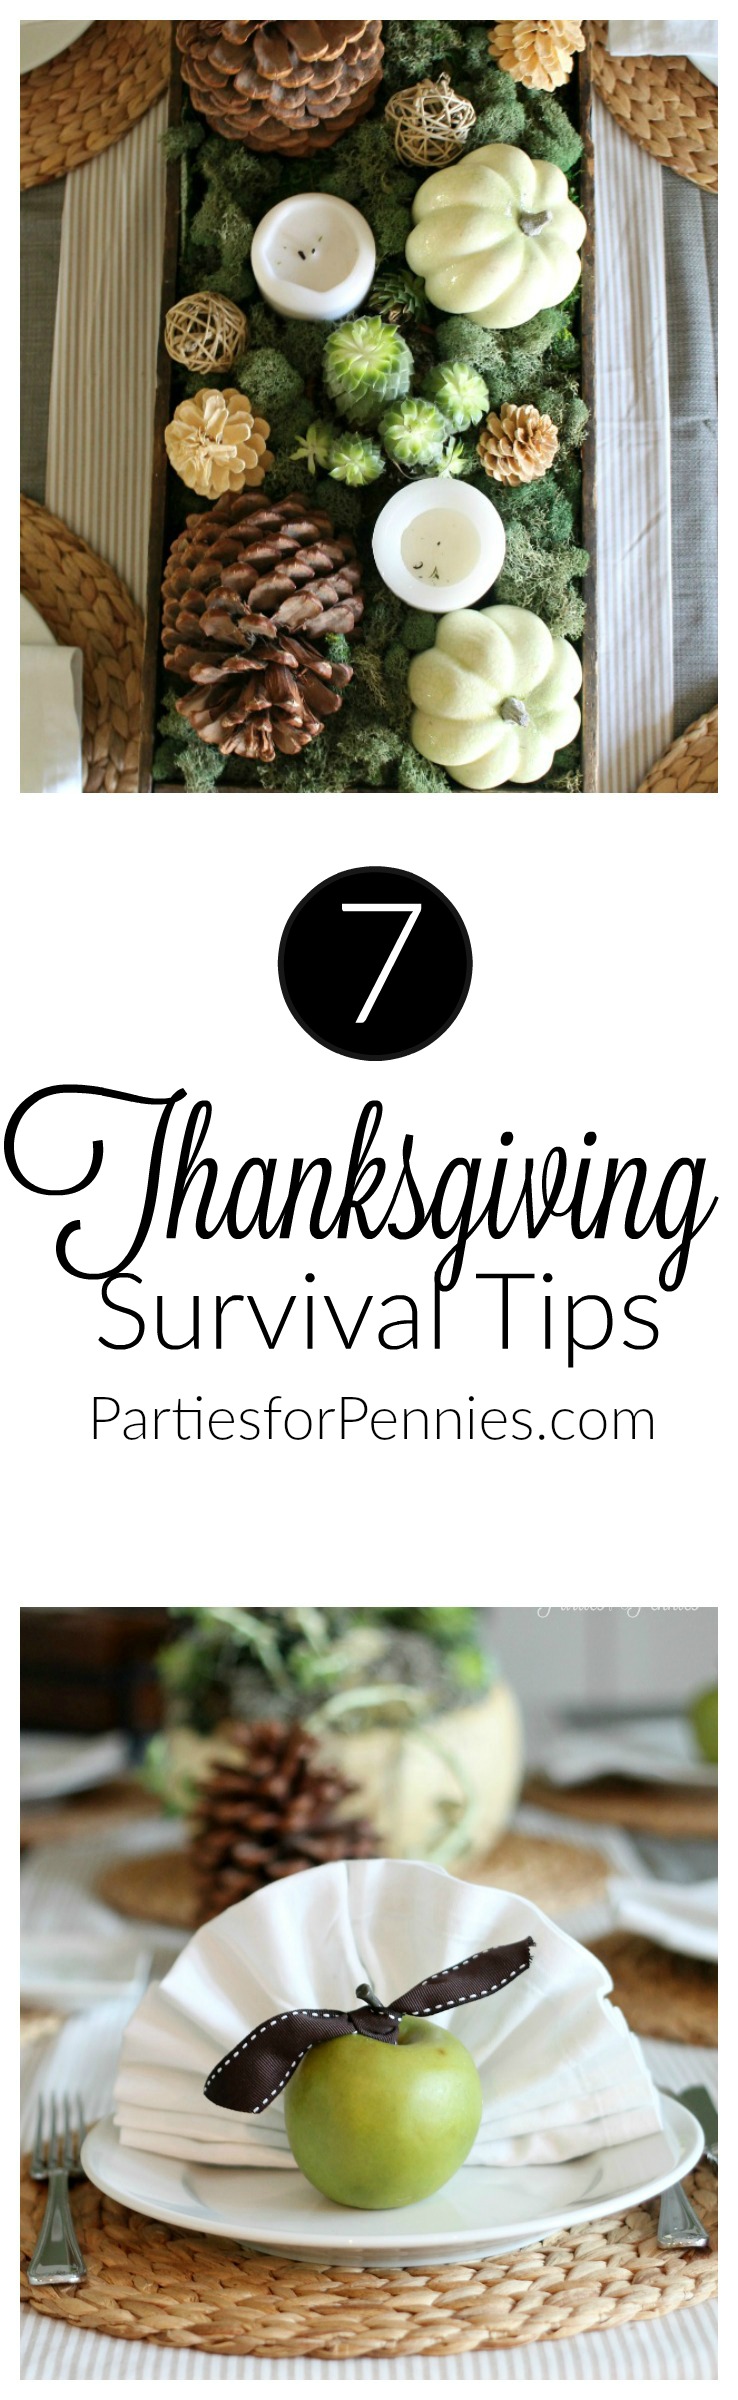 Budget-friendly Thanksgiving Tips by PartiesforPennies.com _Pinterest